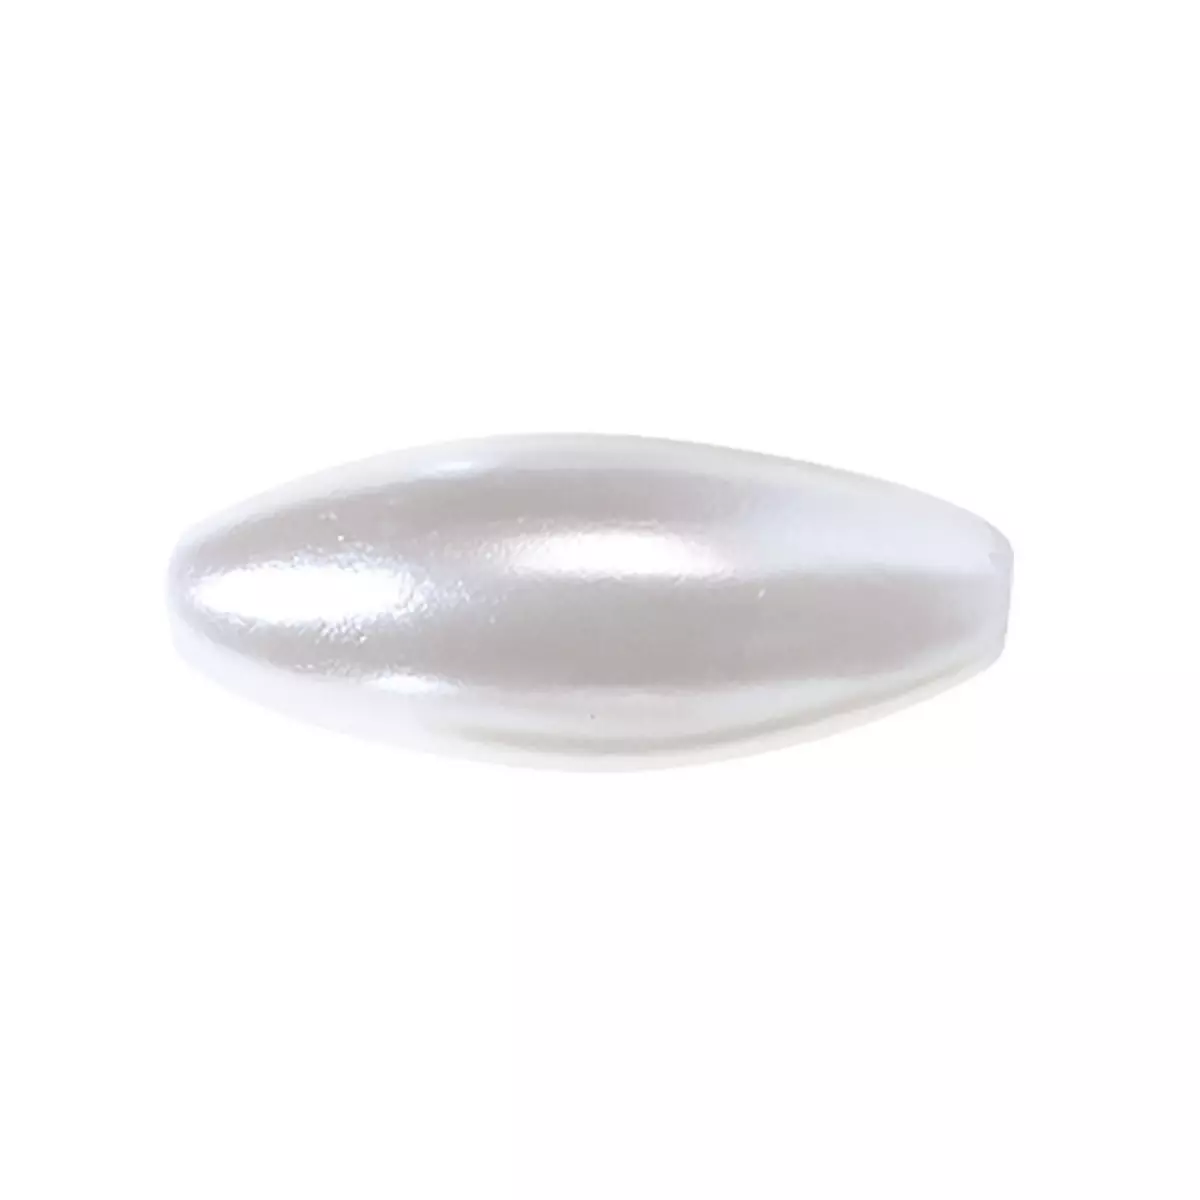 Rayher Perles blanches, 6x14 mm, boîte 25 pces